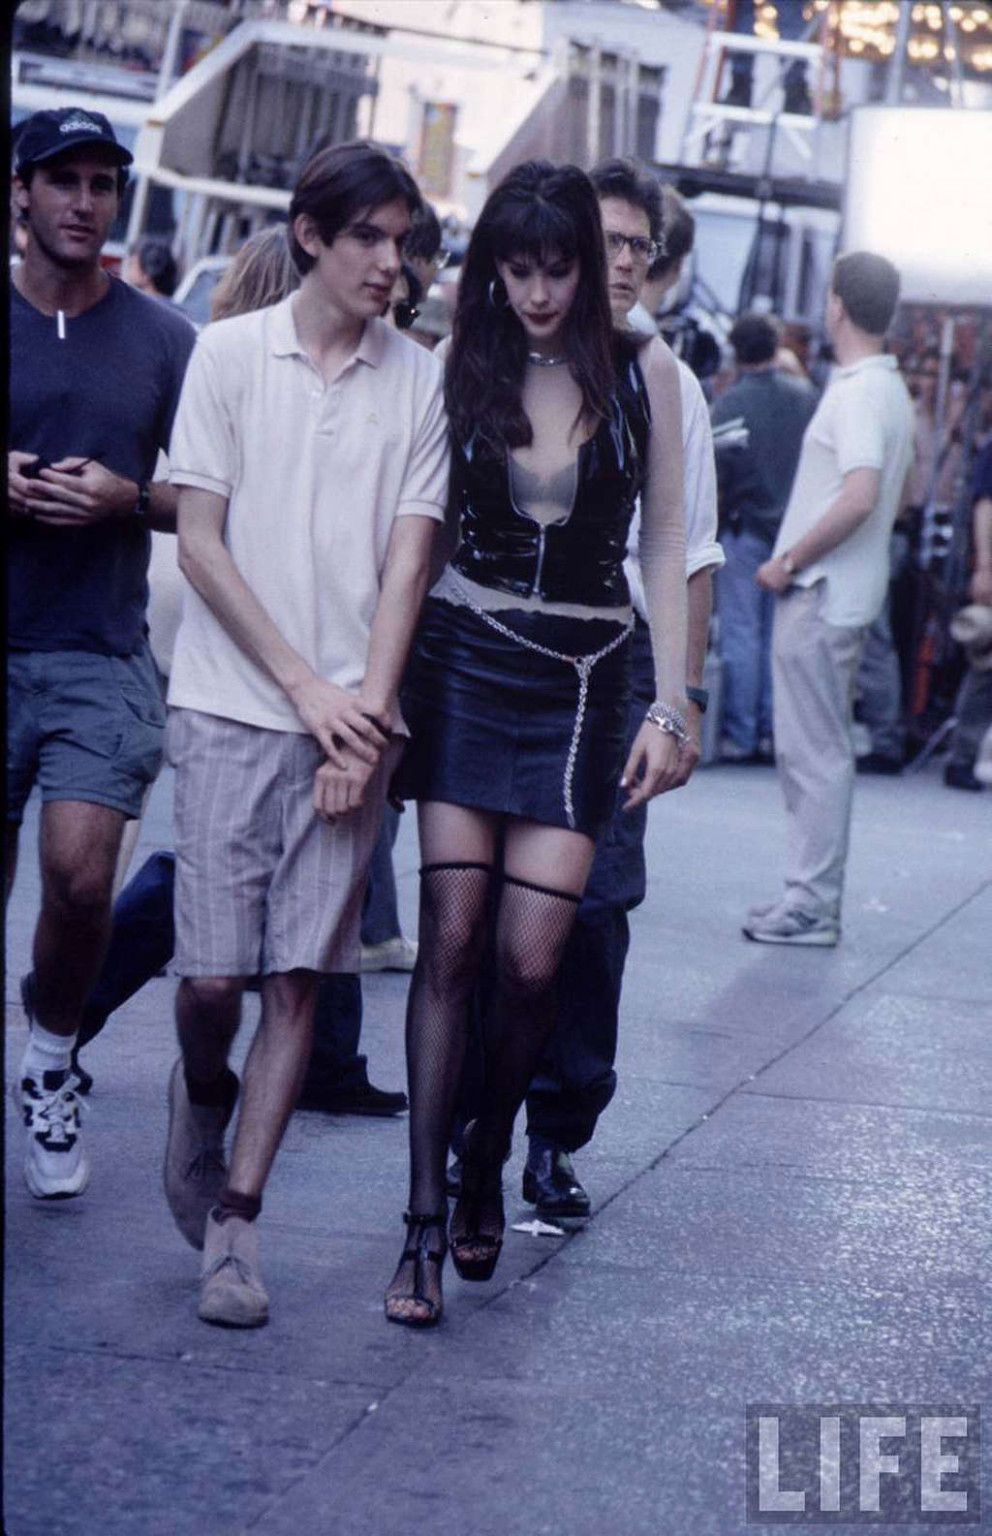 Liv Tyler showing her fucking sexy body and hot ass while she was young #75332629